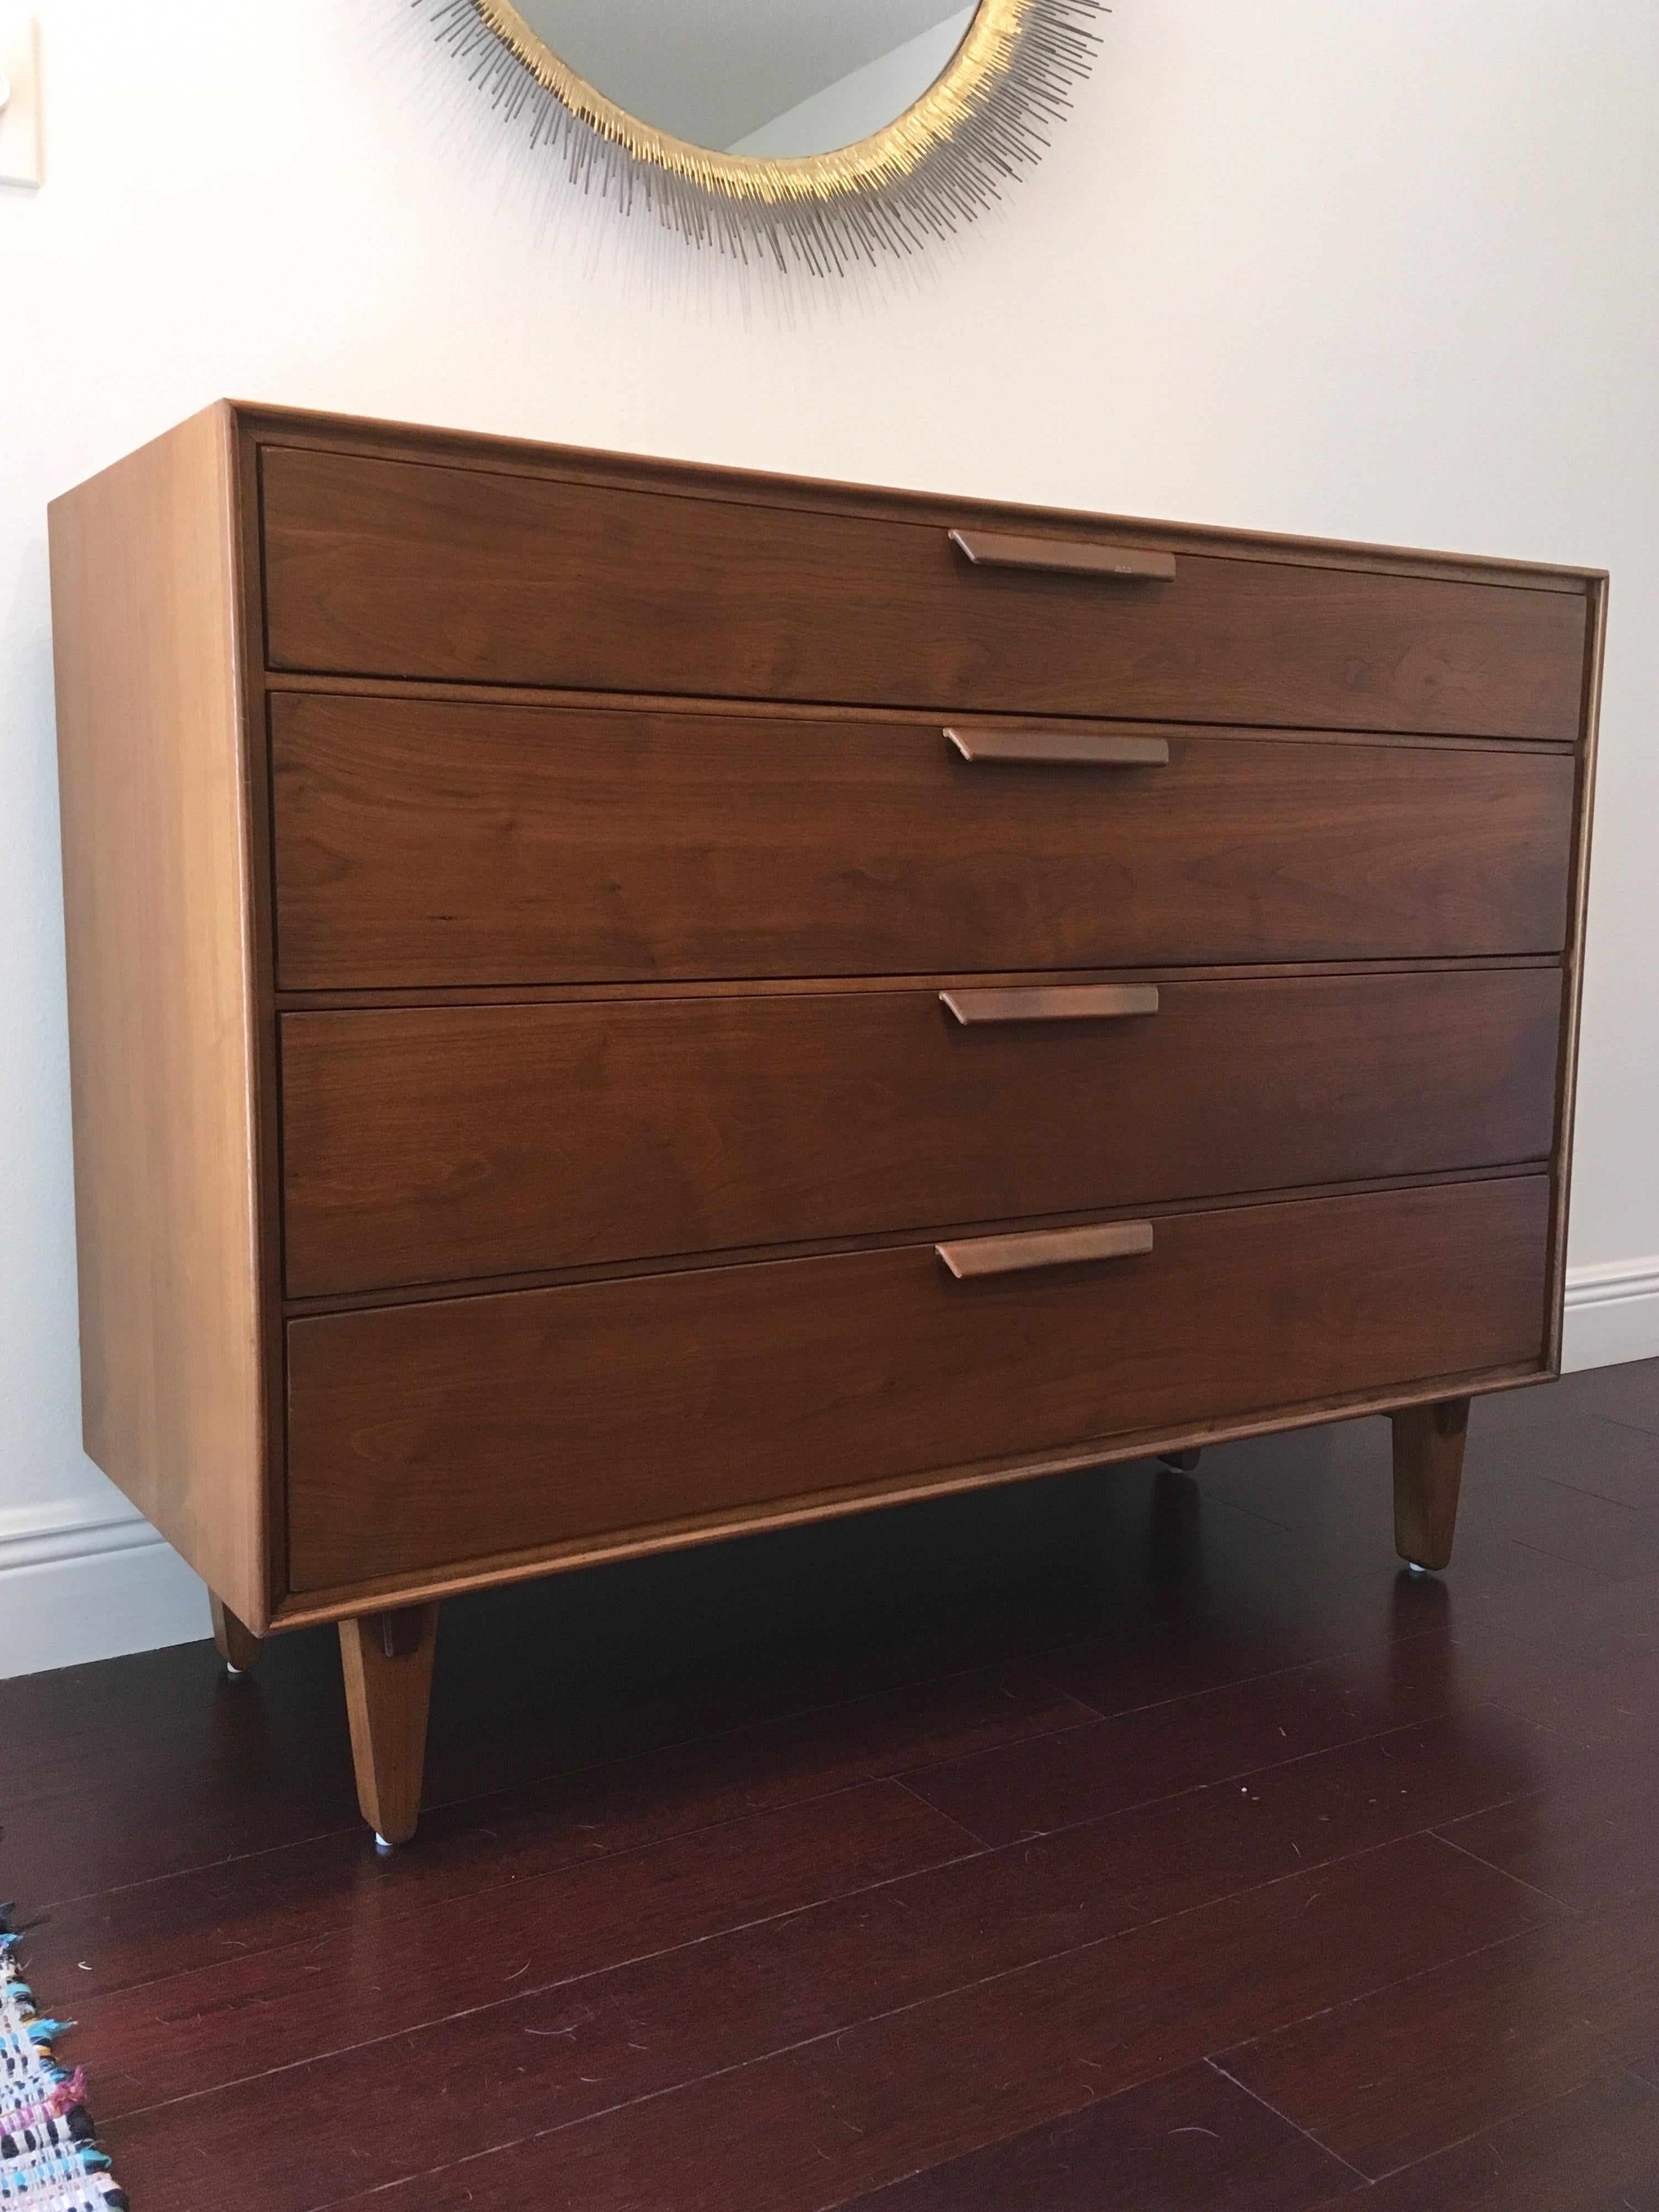 Stunning walnut Dunbar chest designed by Edward Wormley. Four large scale drawers. Legs feature Japanese style- studio/ craftsman details.

 Leather wrapped handles show some signs of wear. Piece has been restored.